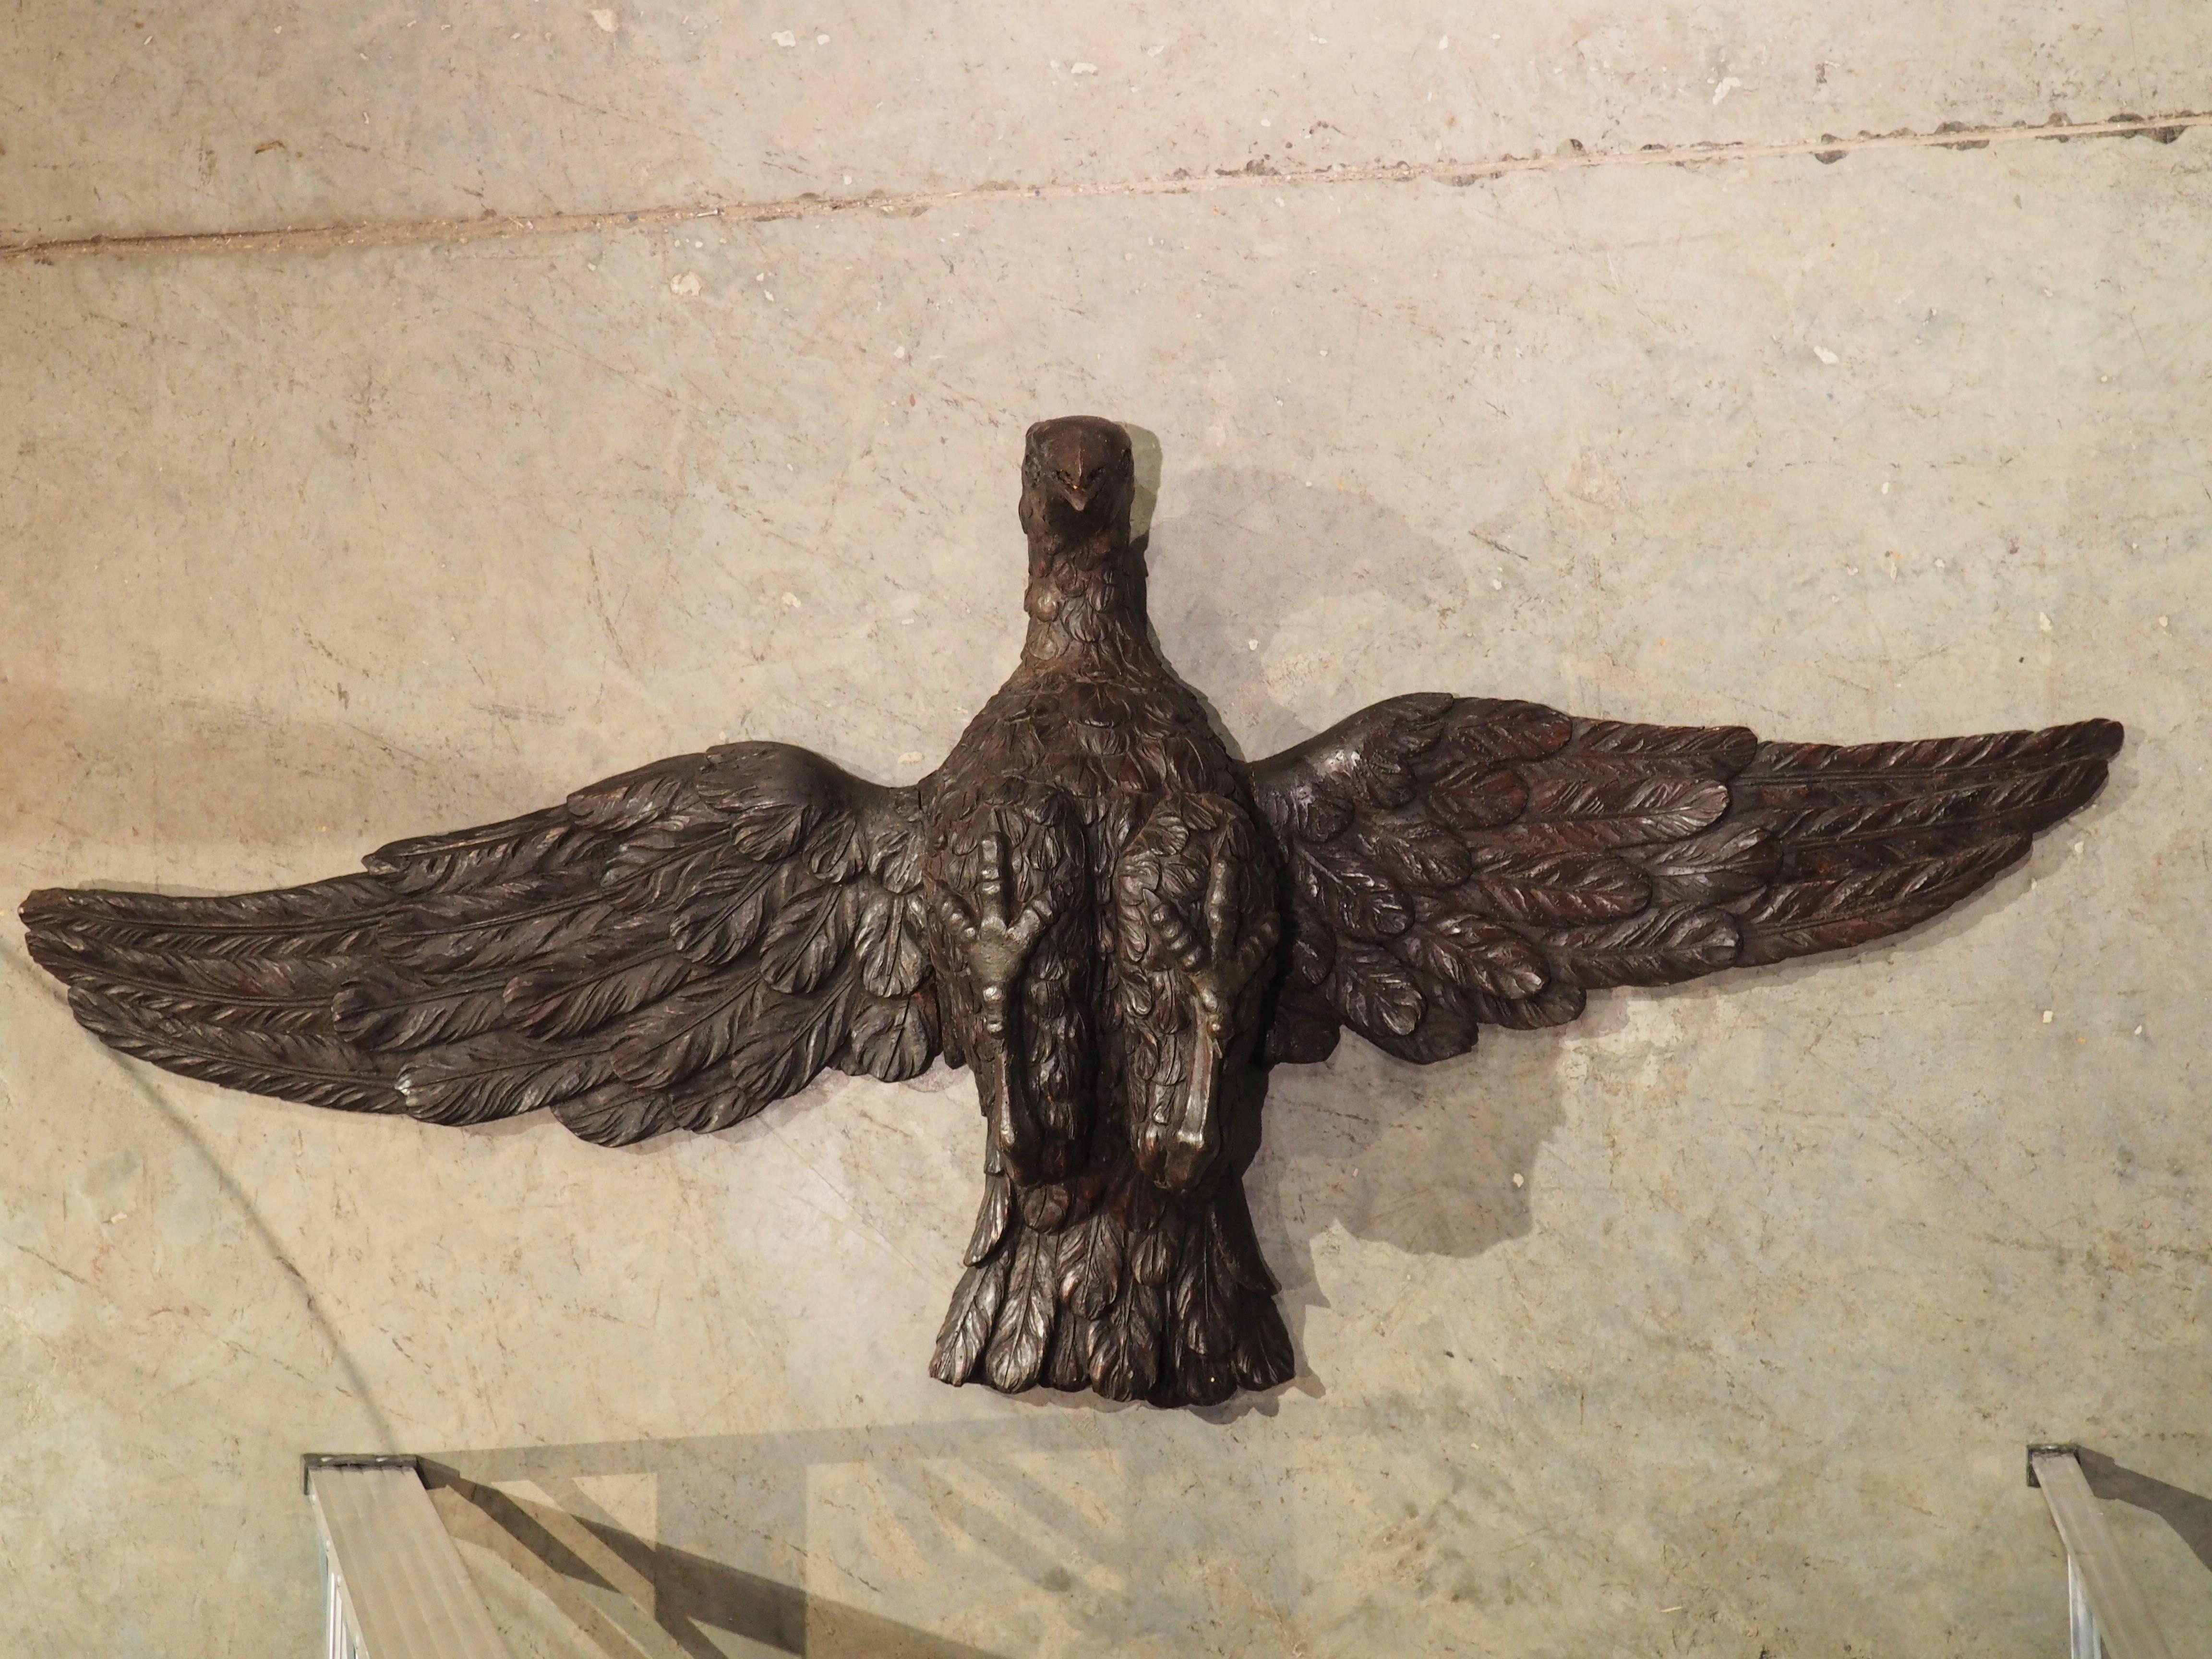 With a wingspan of five and a half feet wide, this wooden eagle has a commanding presence. Hand-carved in France, circa 1810, the eagle was crafted by a master-level woodworker. Notice how each feather has been carved with incredible detail, showing